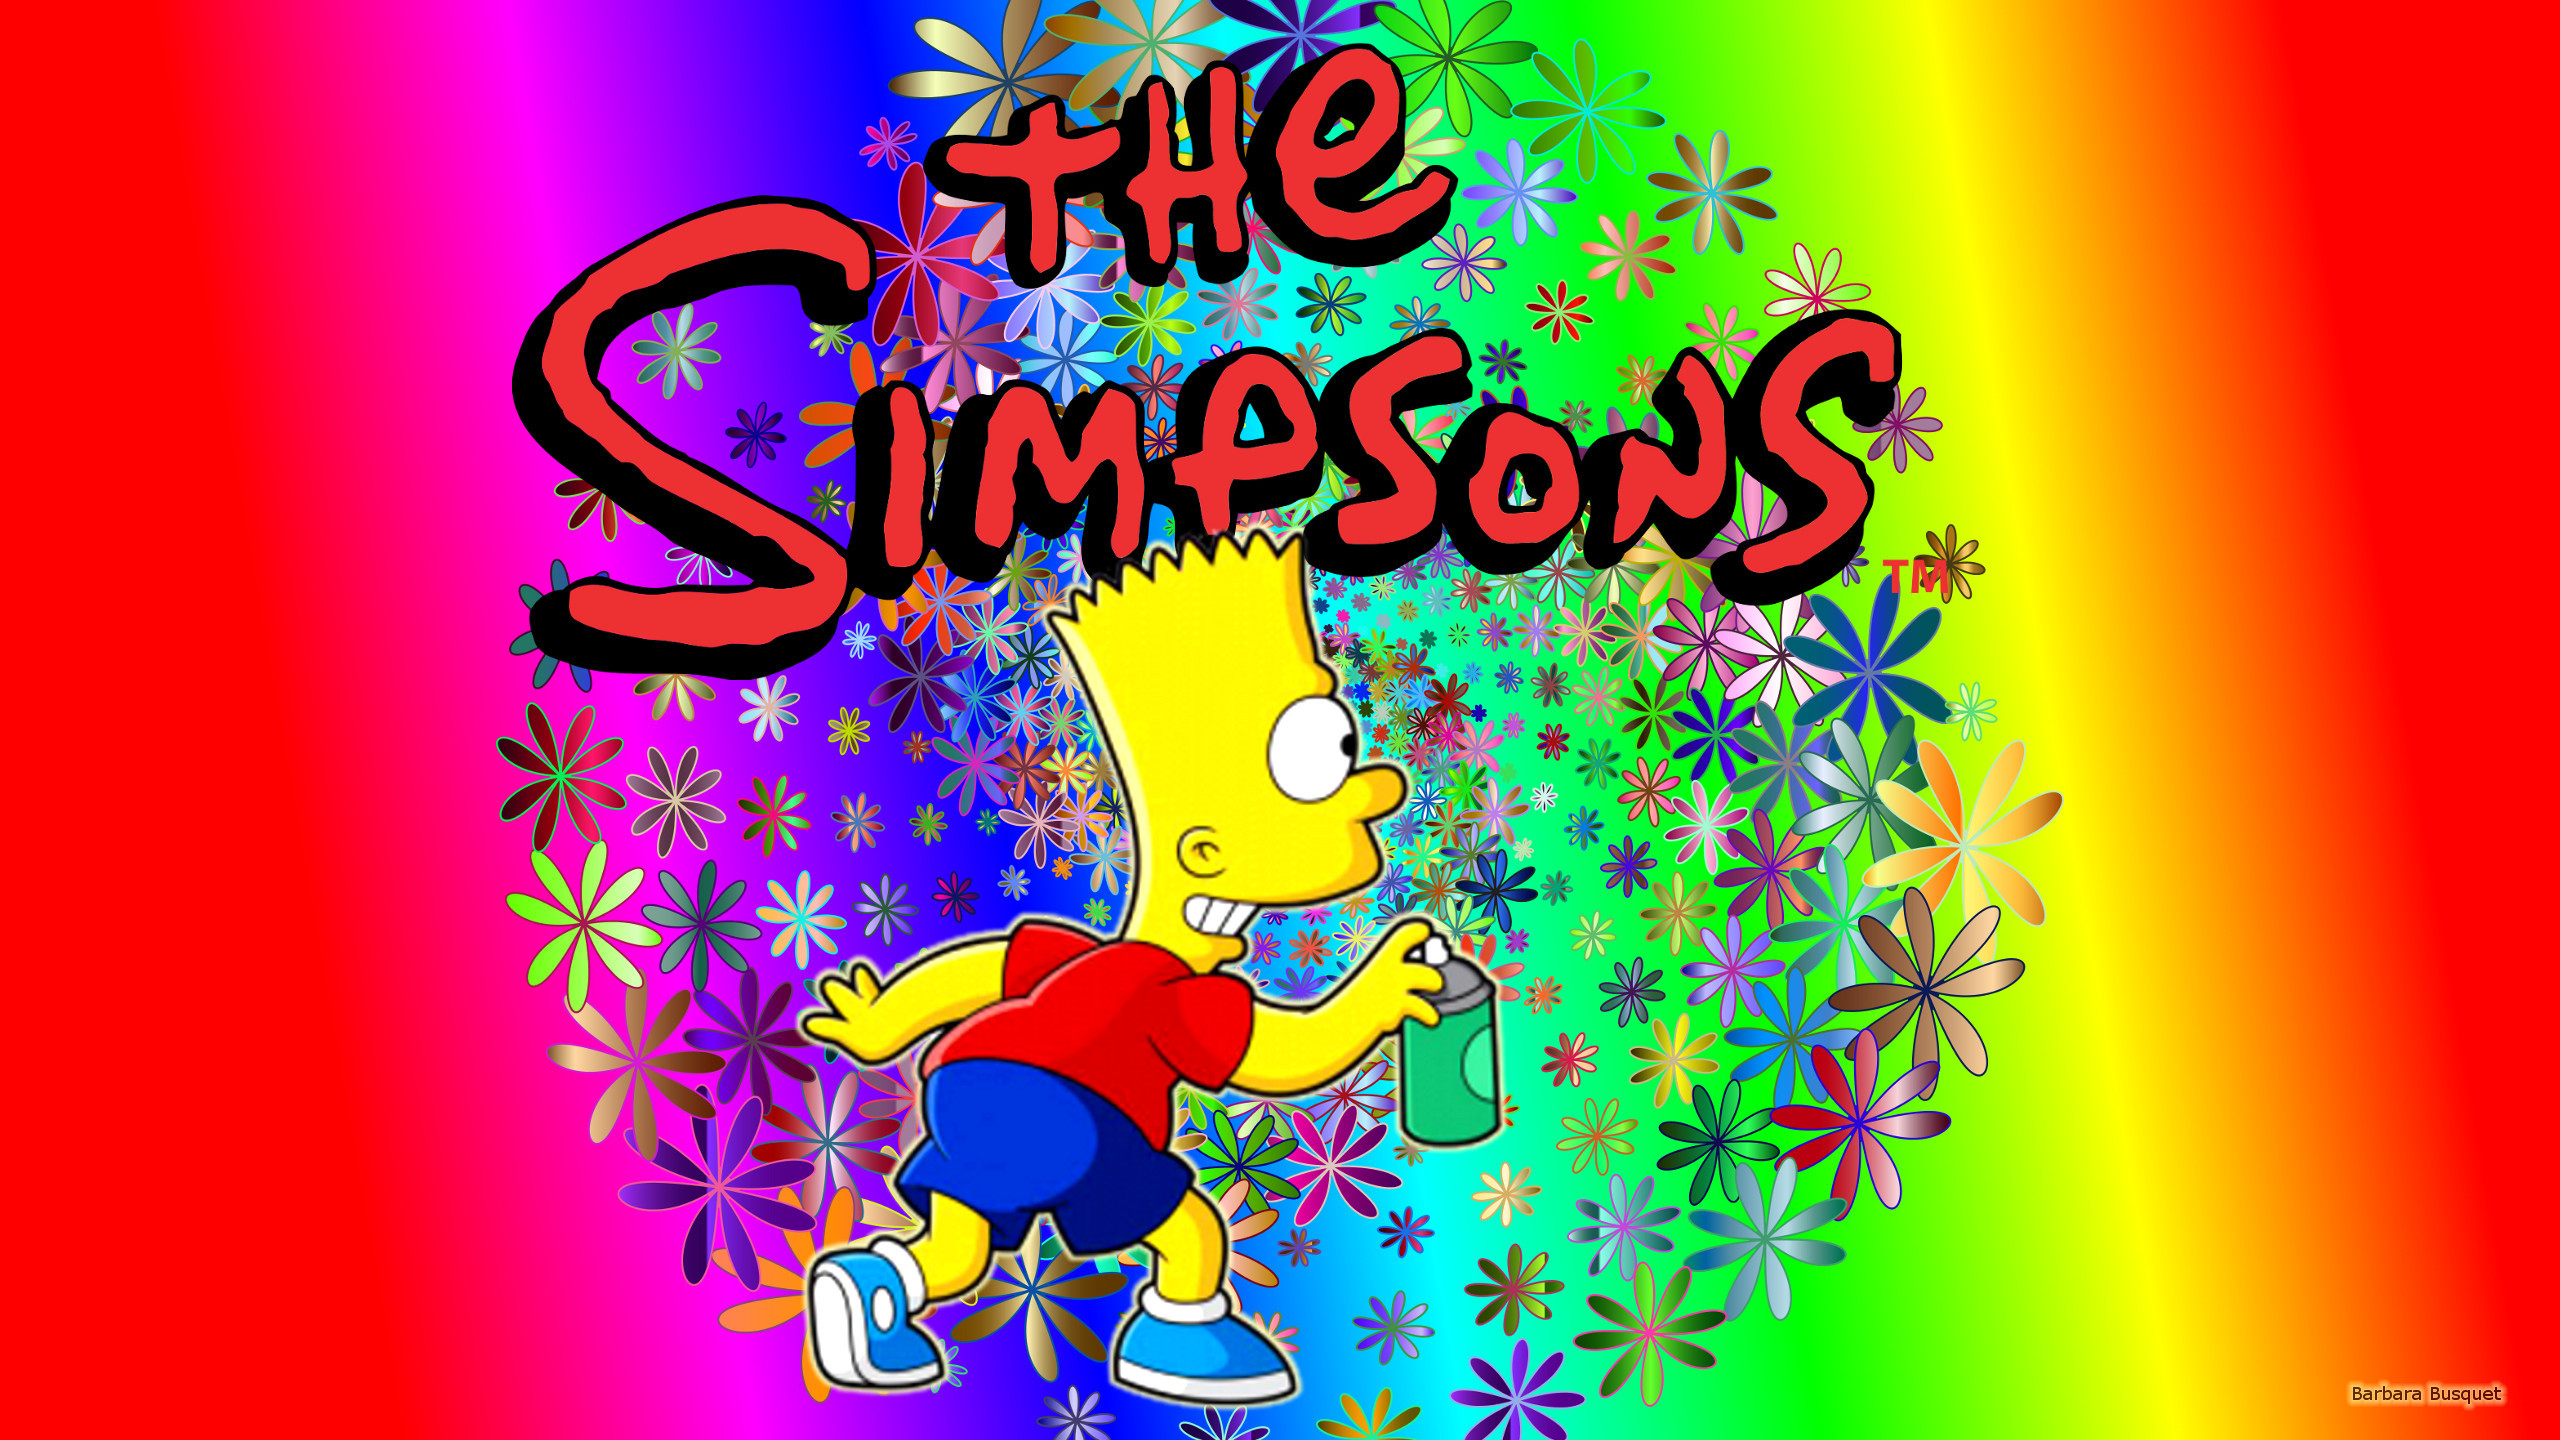 2560x1440 Colorful The Simpsons wallpaper with Bart, logo and flowers.